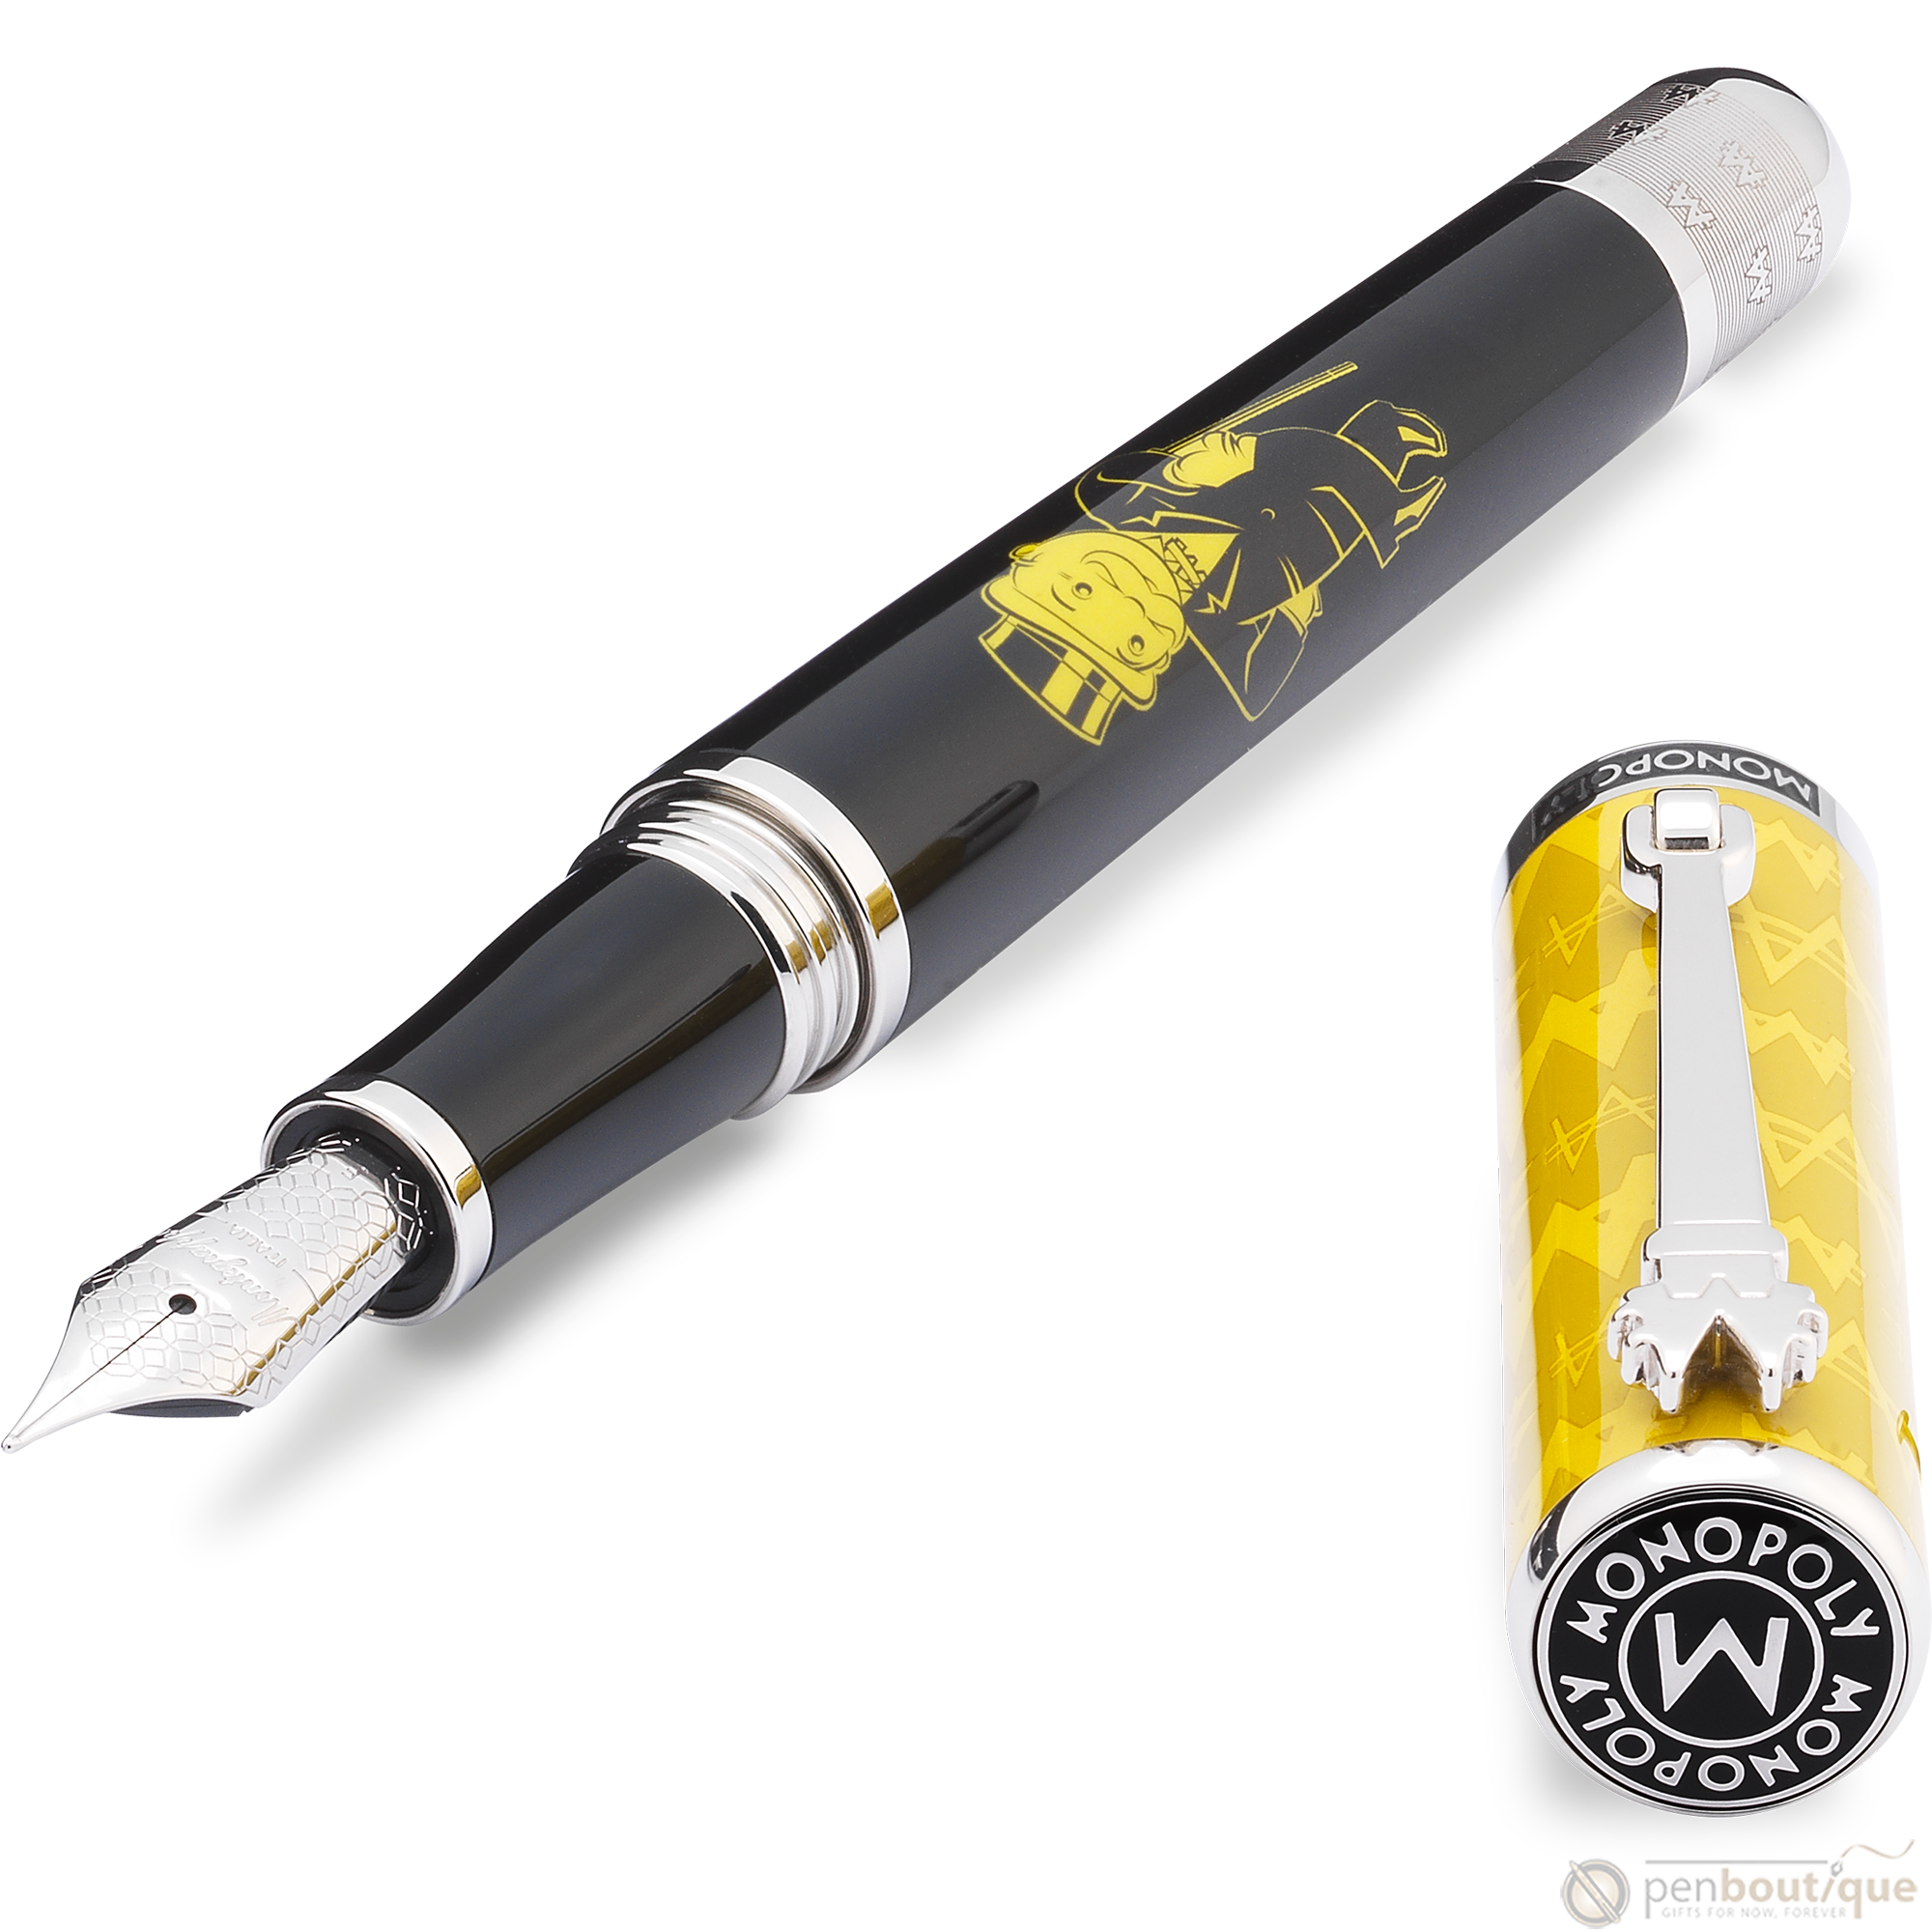 Montegrappa Monopoly Fountain Pen - Player's Edition - Tycoon-Pen Boutique Ltd